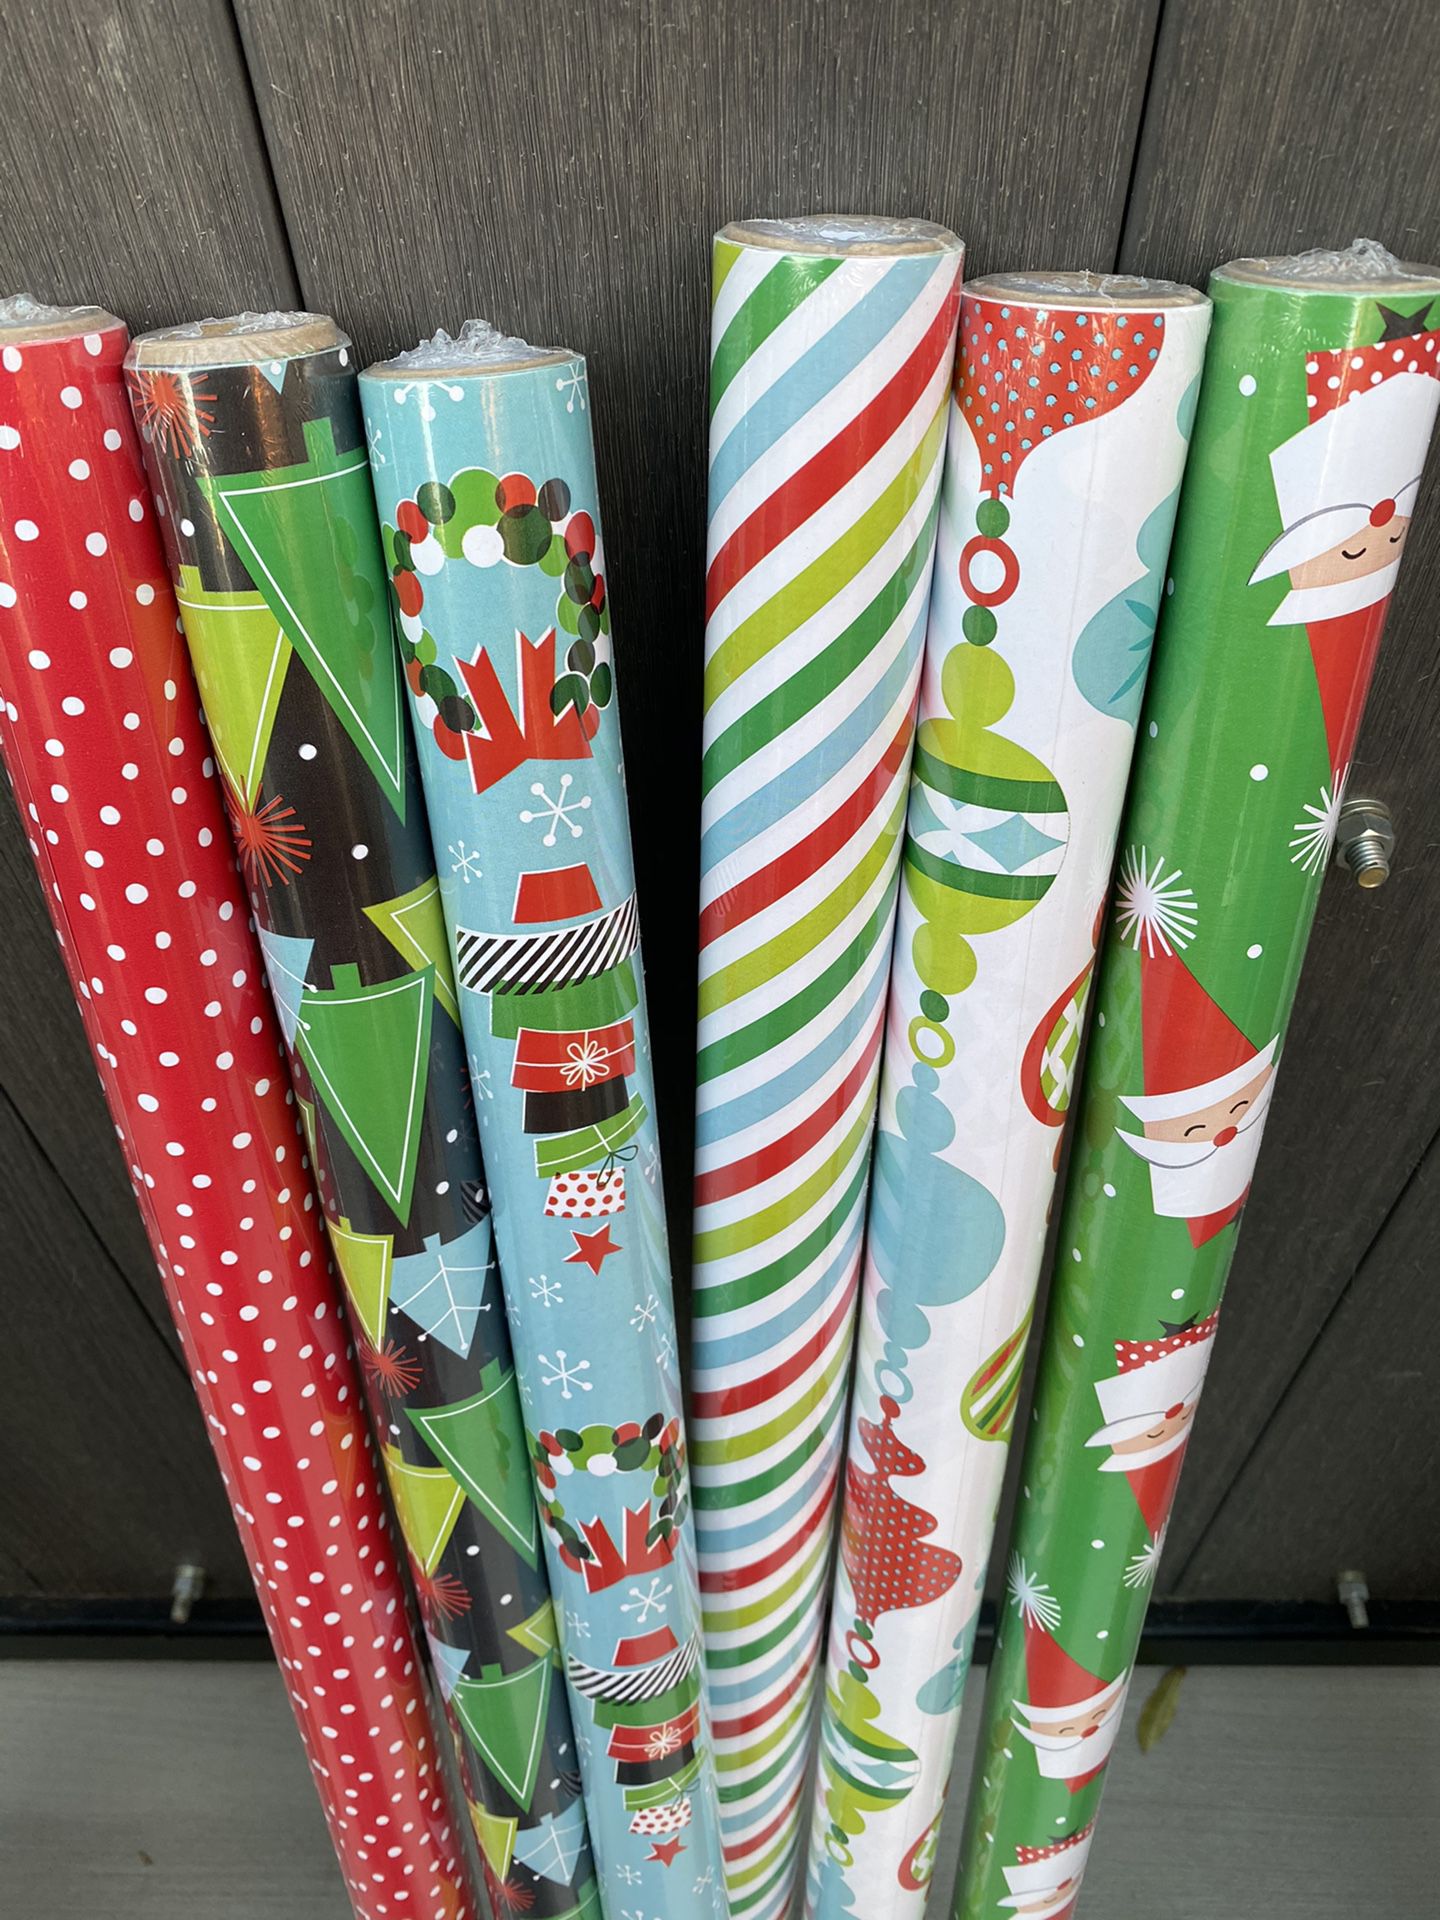 Hallmark Christmas Wrapping Paper Bundle with Cut Lines on Reverse